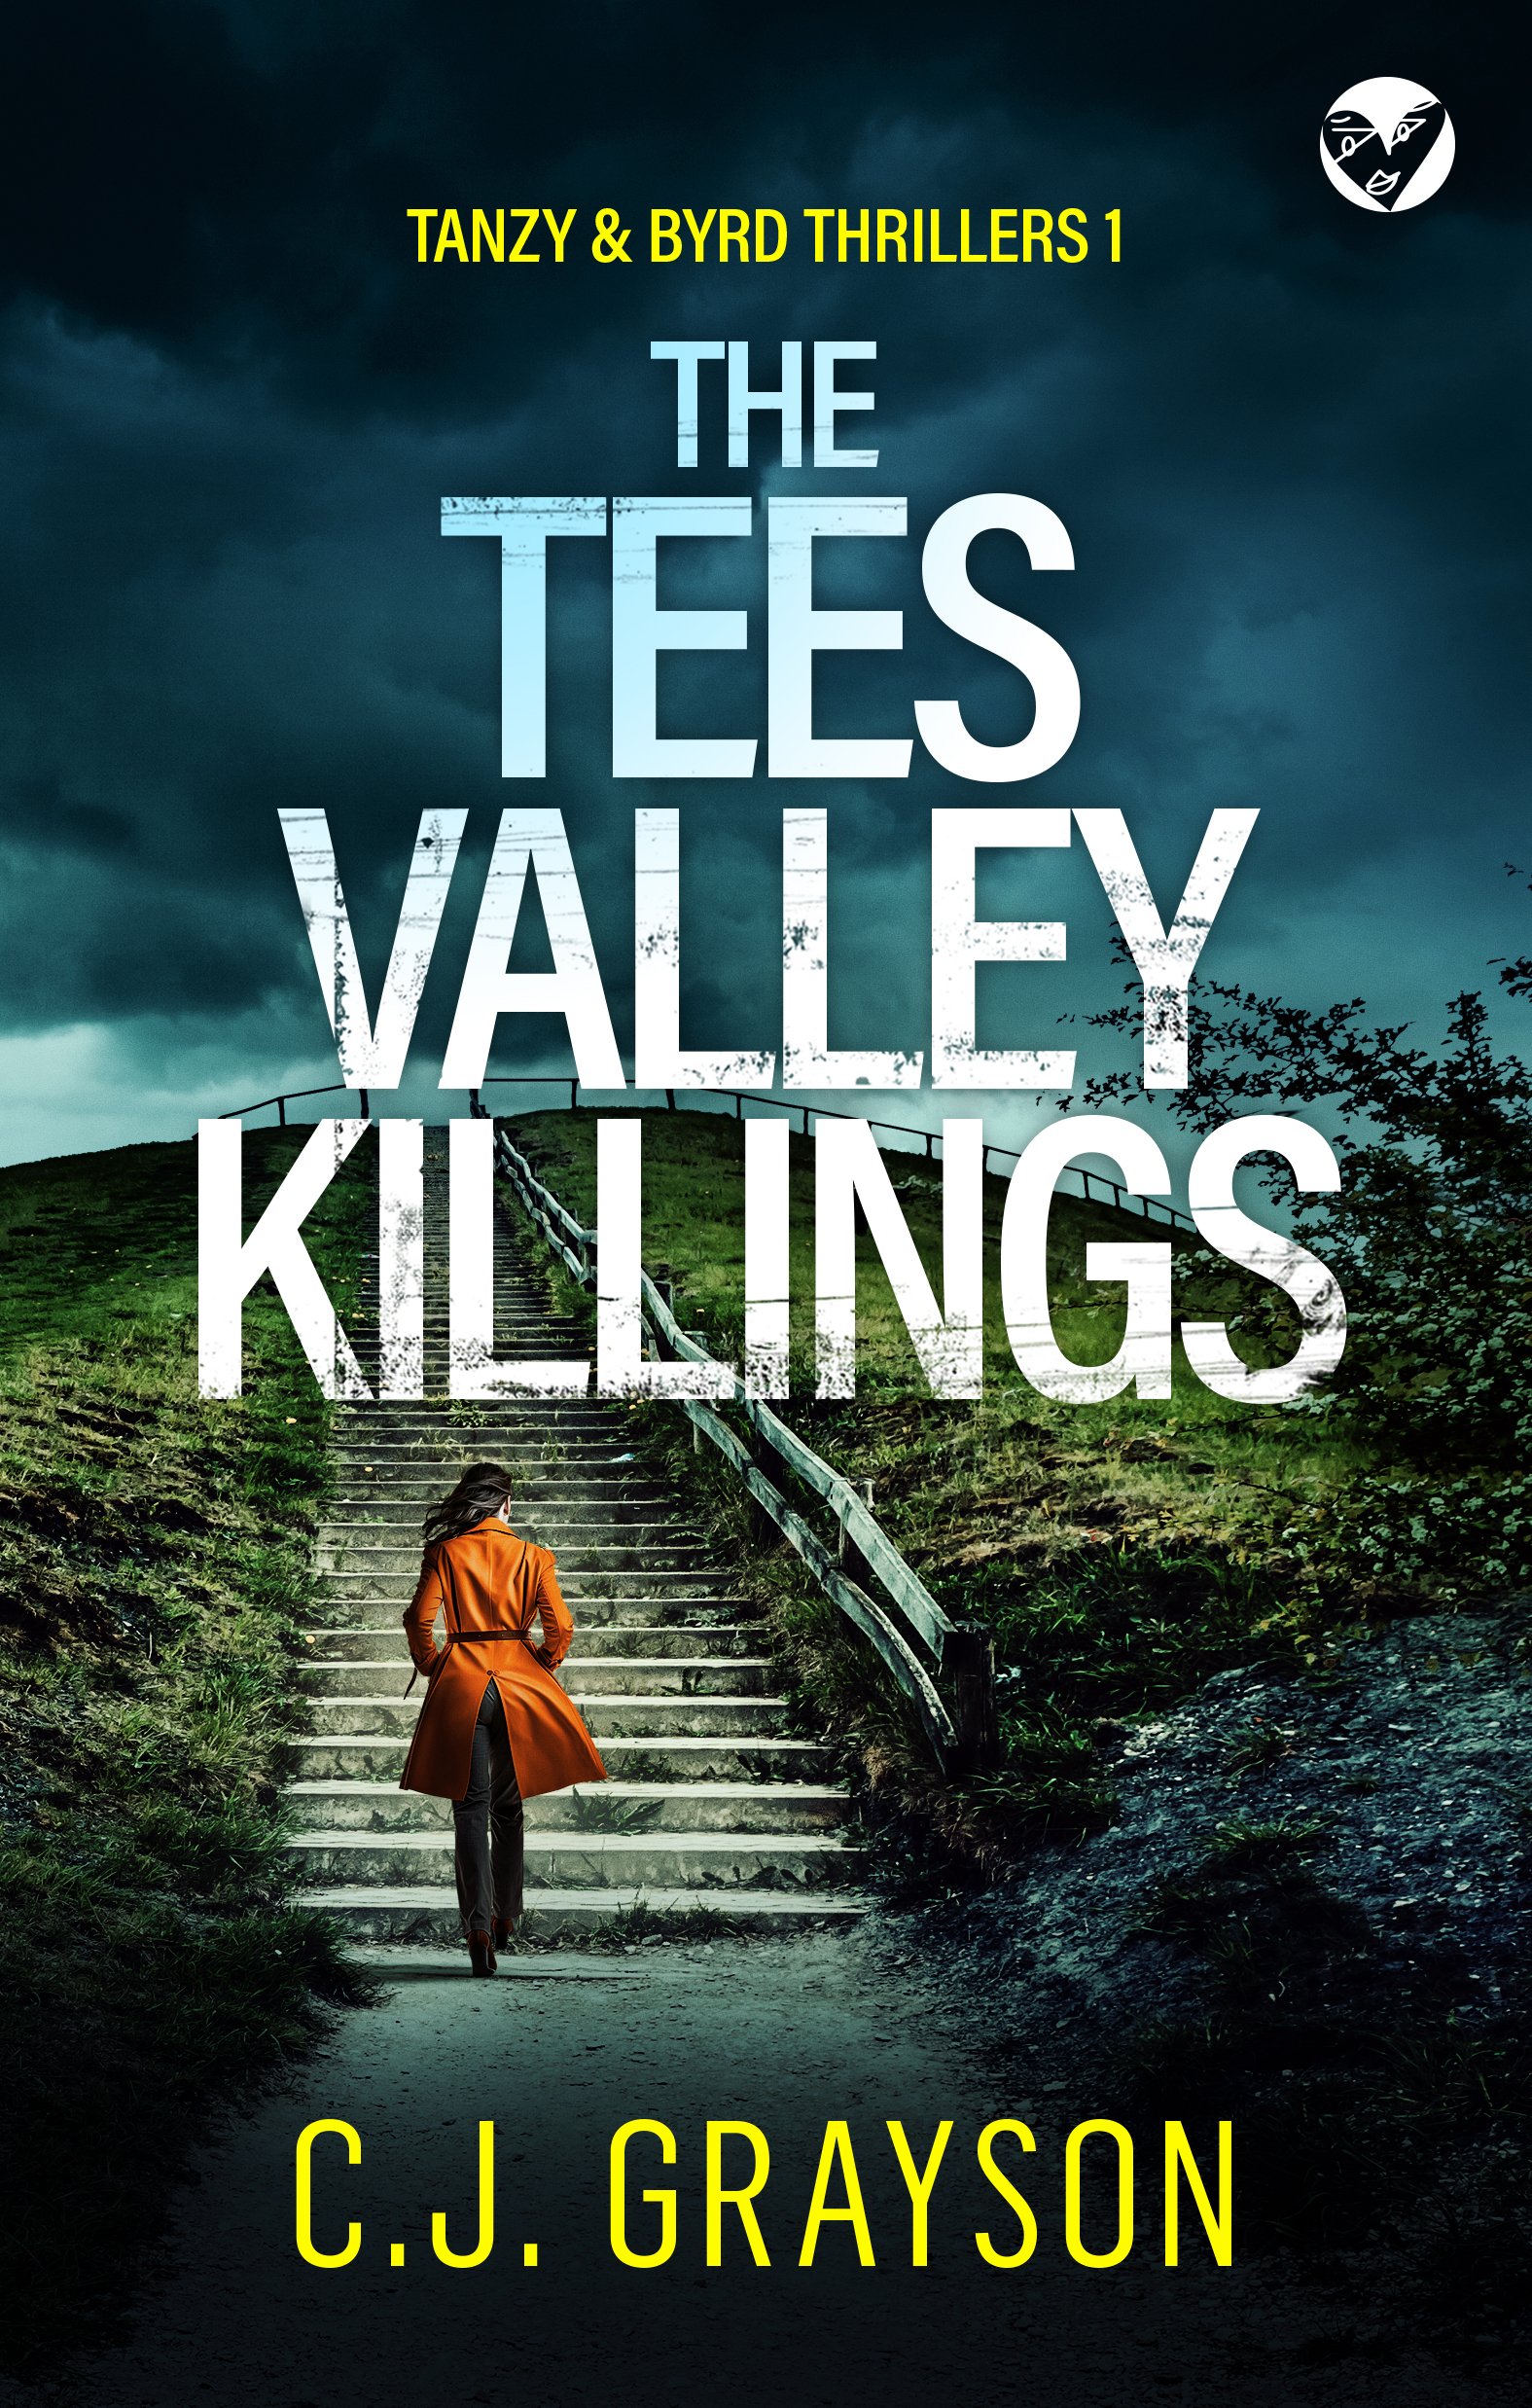 THE TEES VALLEY KILLINGS cover publish.jpg